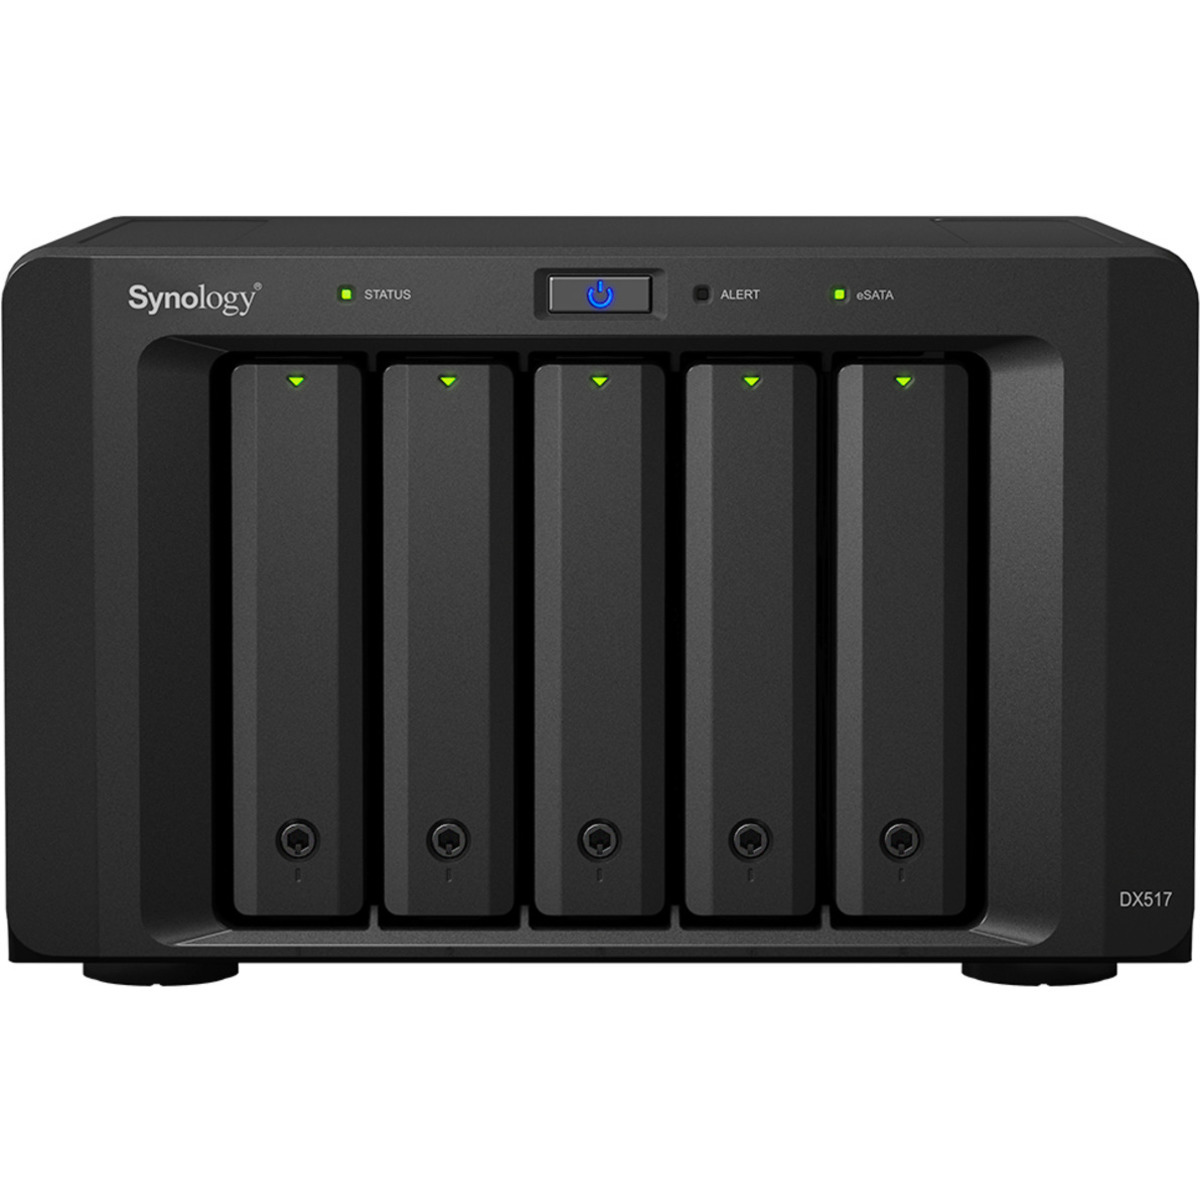 Synology DX517 External Expansion Drive 5tb 5-Bay Desktop Multimedia / Power User / Business Expansion Enclosure 5x1tb Crucial MX500 CT1000MX500SSD1 2.5 560/510MB/s SATA 6Gb/s SSD CONSUMER Class Drives Installed - Burn-In Tested DX517 External Expansion Drive